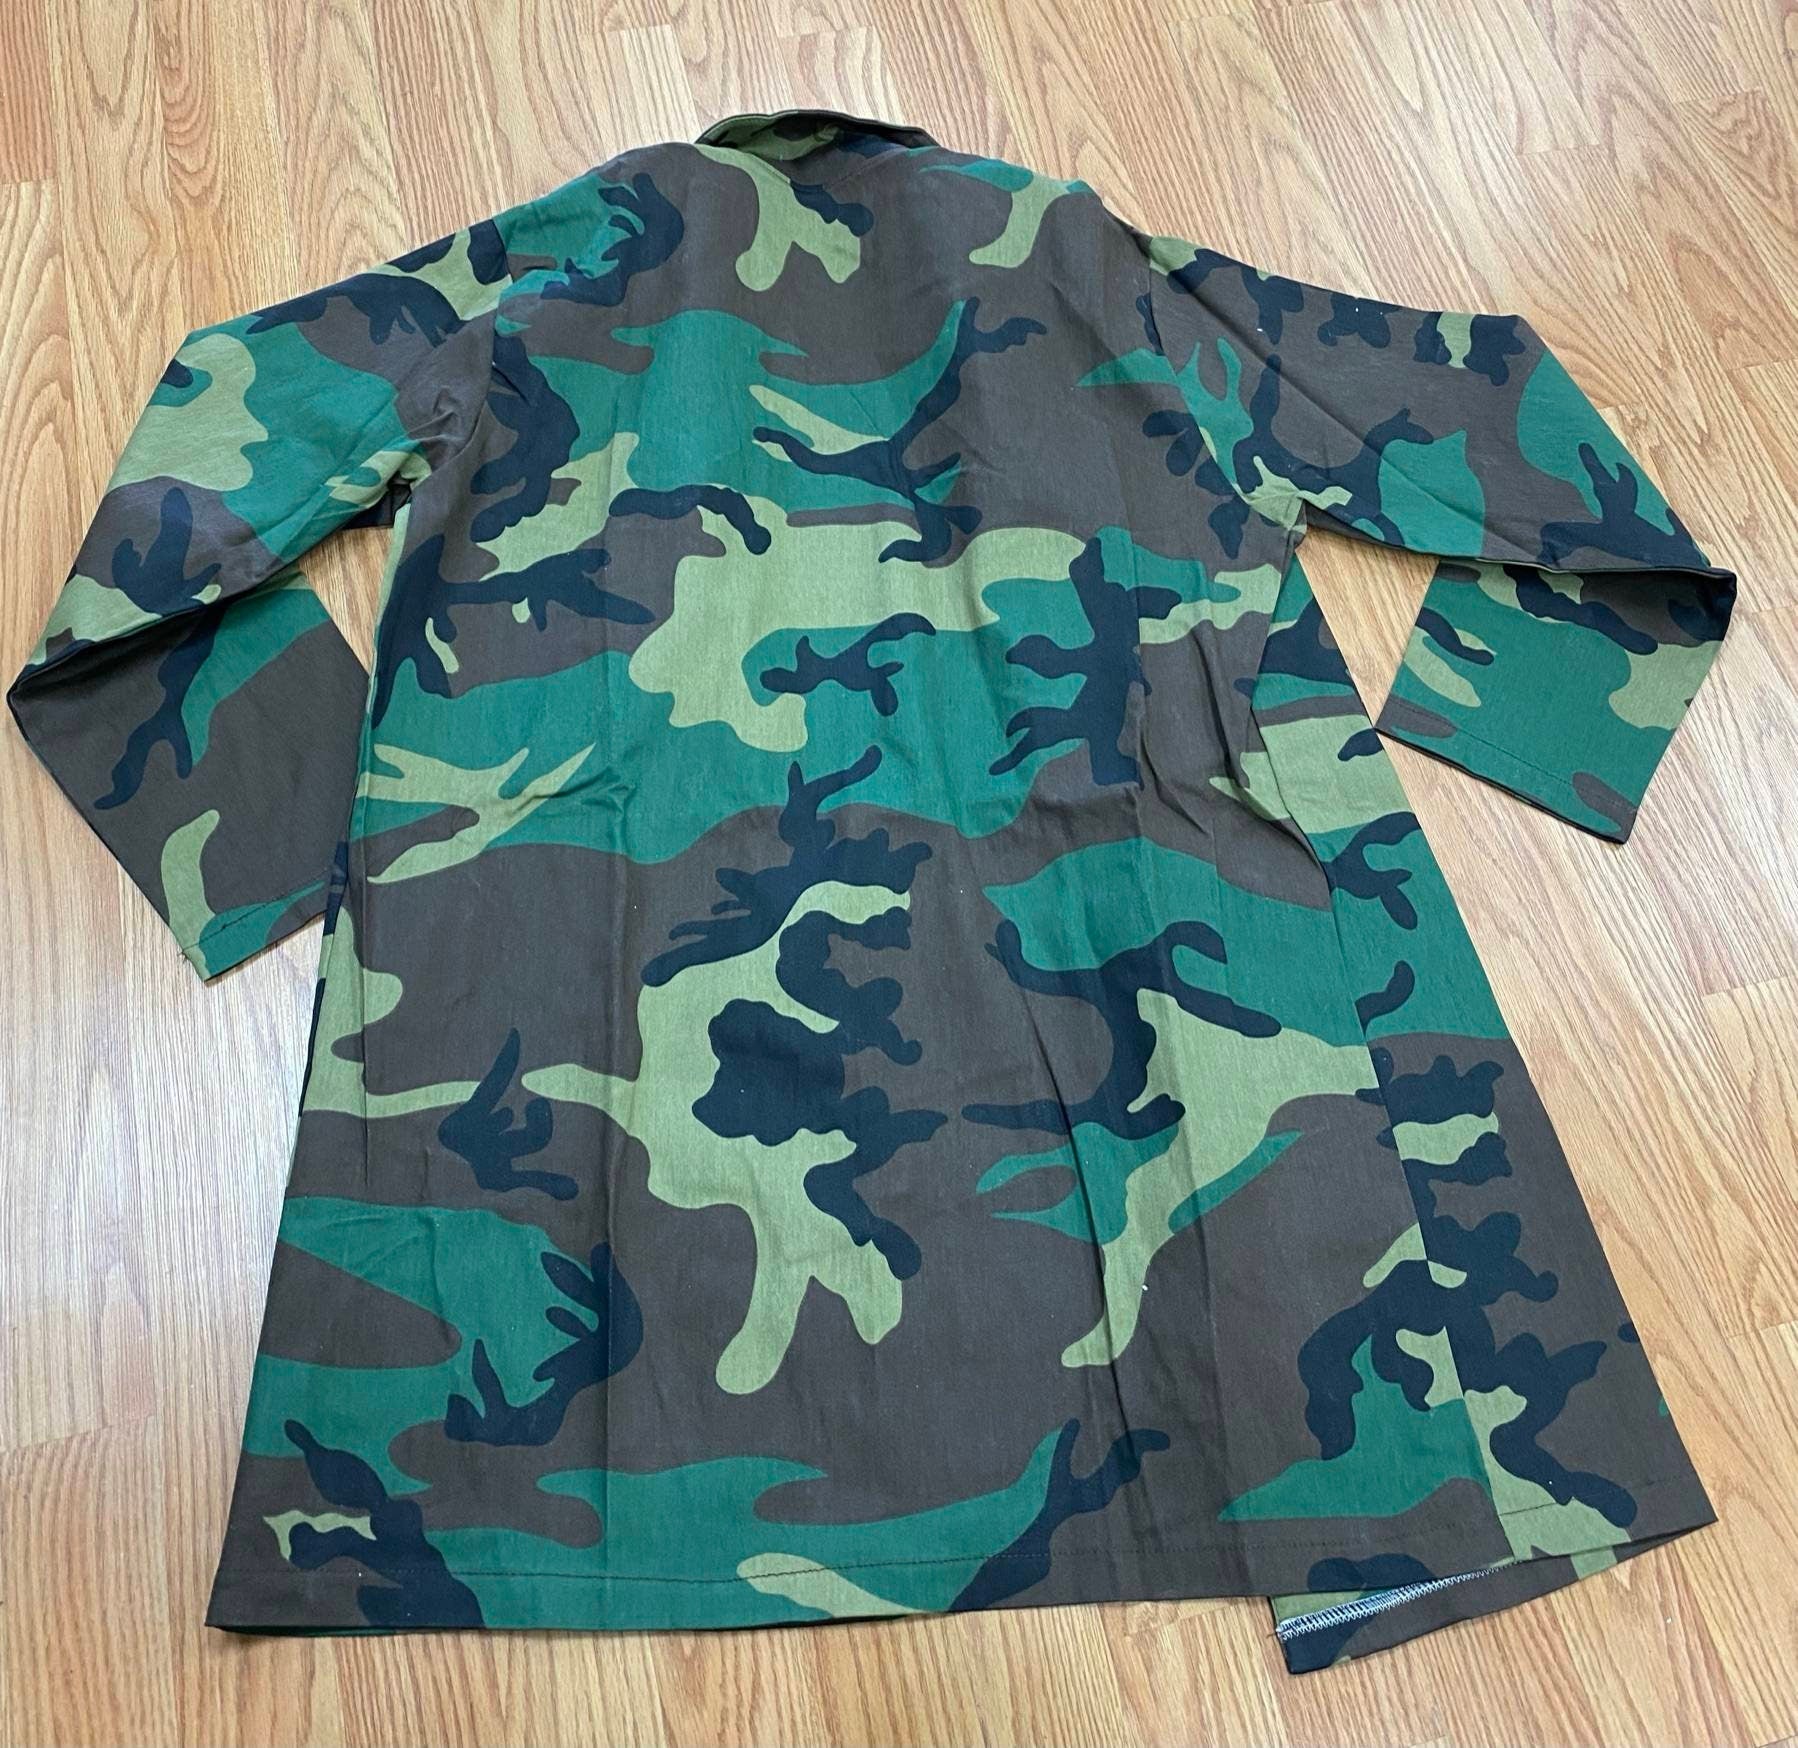 New, Fashionable Camo Jacket for Women, Gray US Army Print, 4-Pocket, Button Up Cotton Camo with Spandex, Thigh Length Army Jacket, True Fit